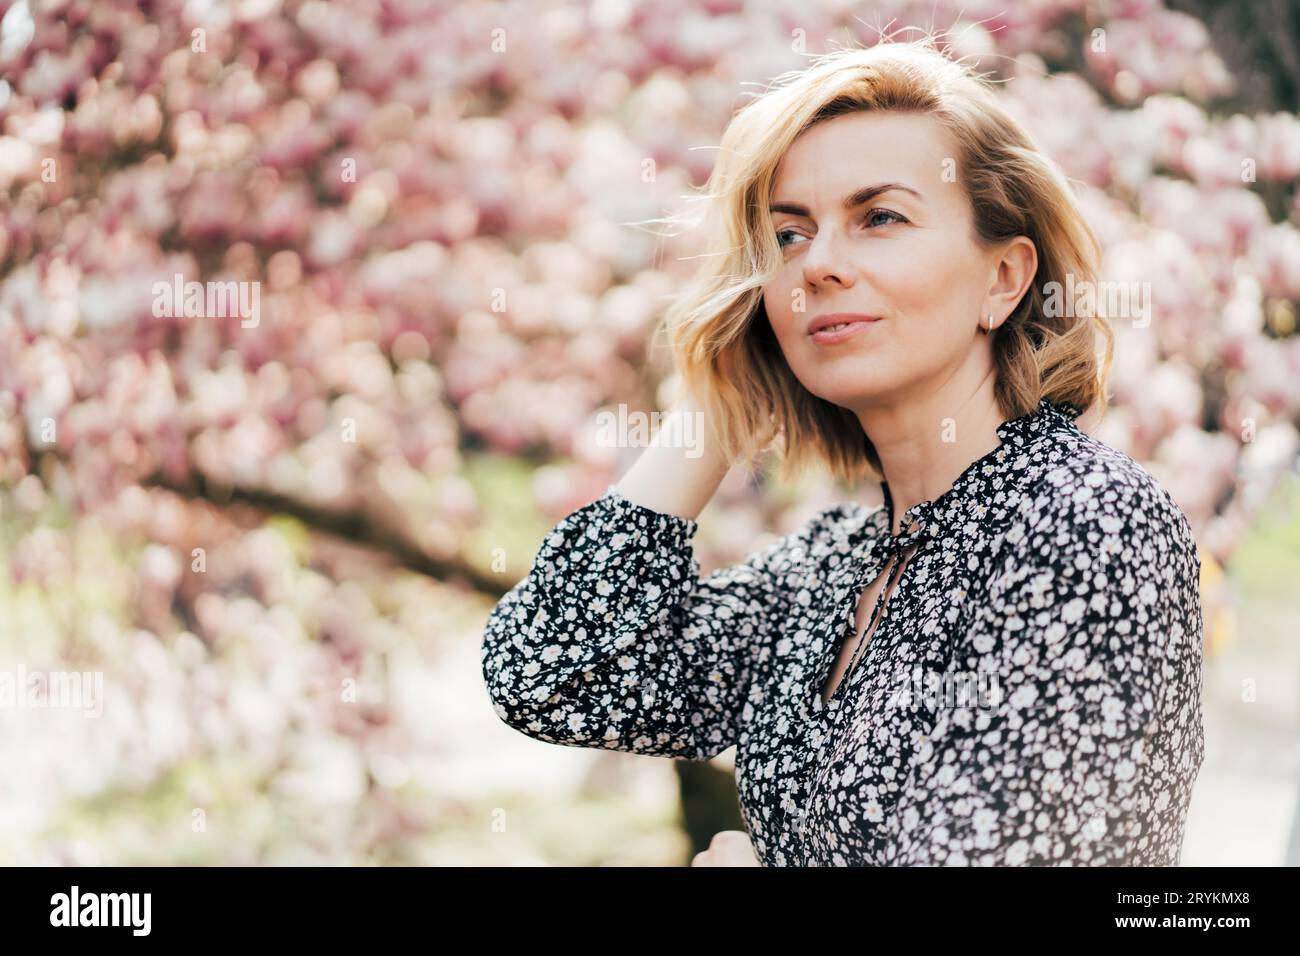 Portrait of a beautiful woman in her forties. Profile portrait with a pink flowering magnolia tree as background. Confident exce Stock Photo